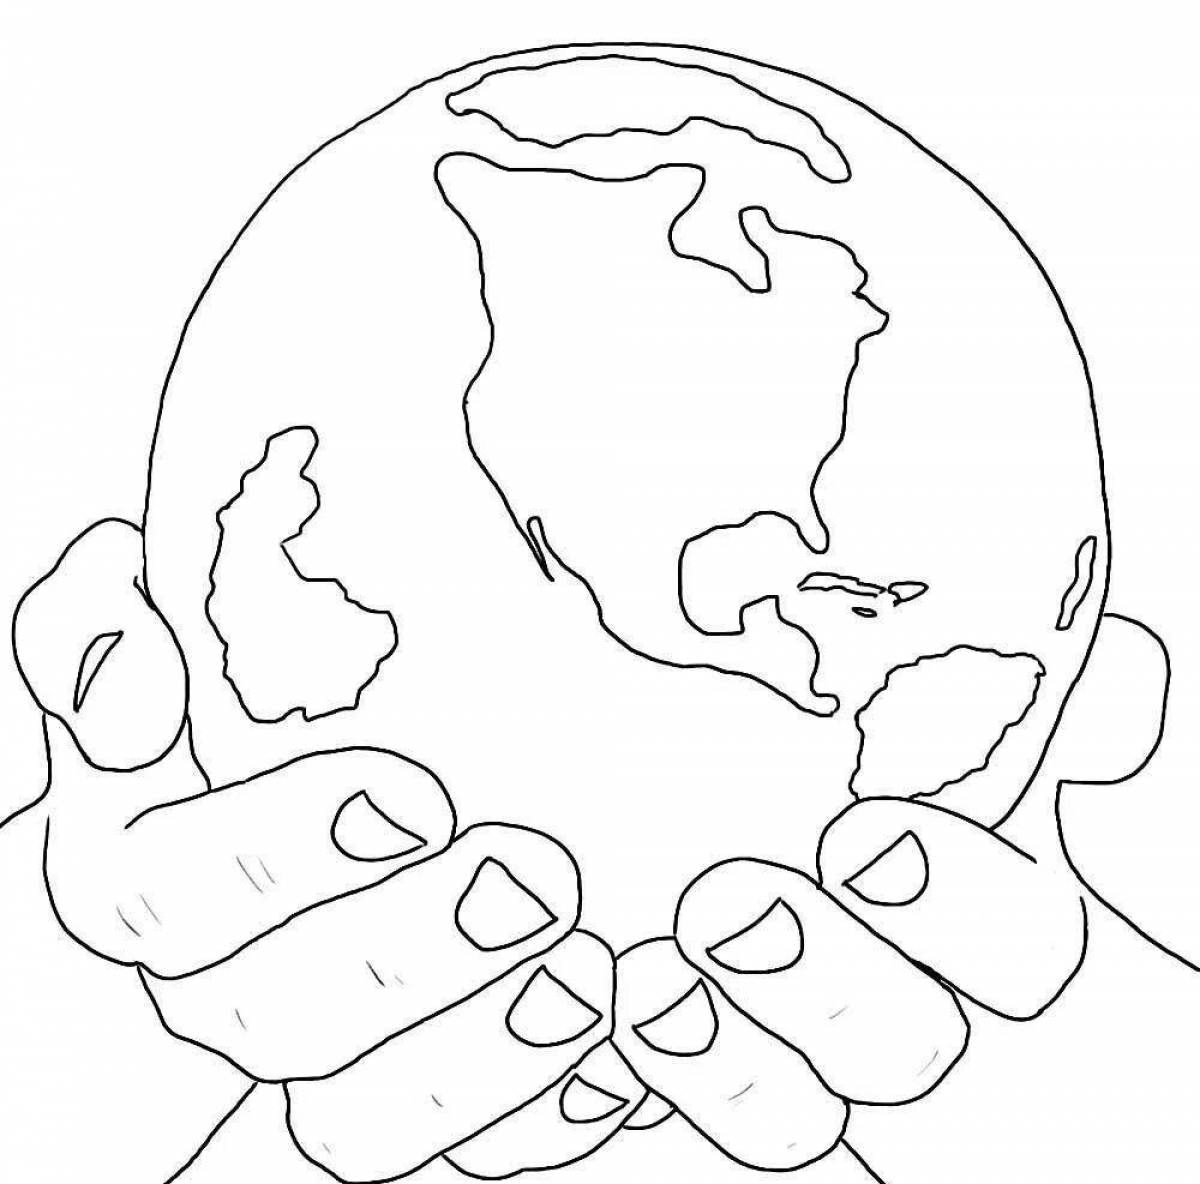 Adorable world without war coloring book for kids